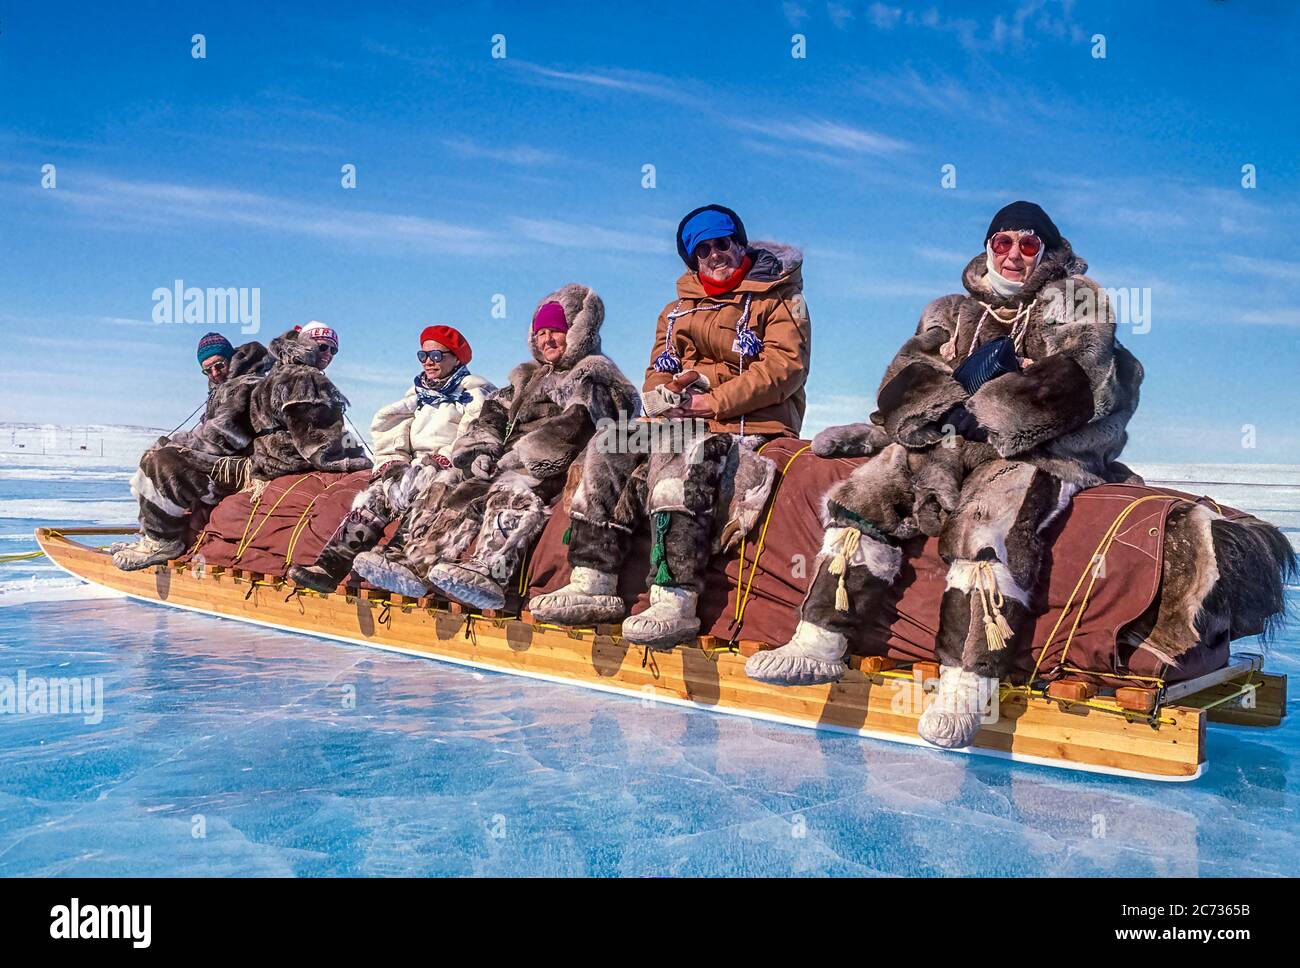 Visitors and local Inuit elders, dressed in traditional caribou skin clothing, sitting on a traditional Inuit cargo sled, also called a komatik. Stock Photo